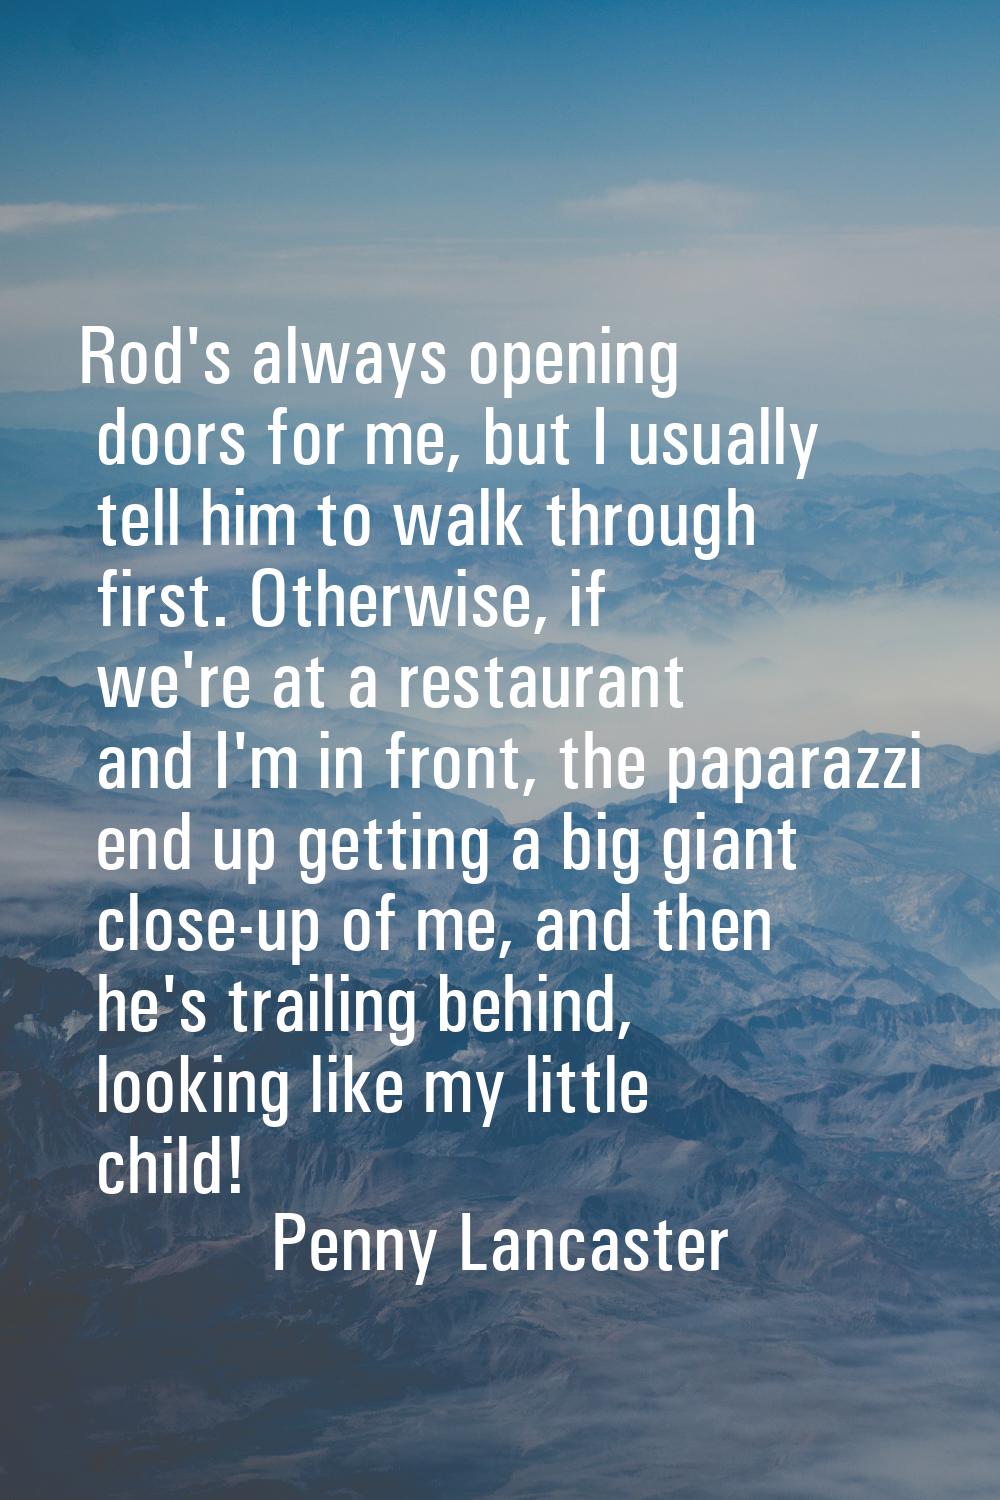 Rod's always opening doors for me, but I usually tell him to walk through first. Otherwise, if we'r